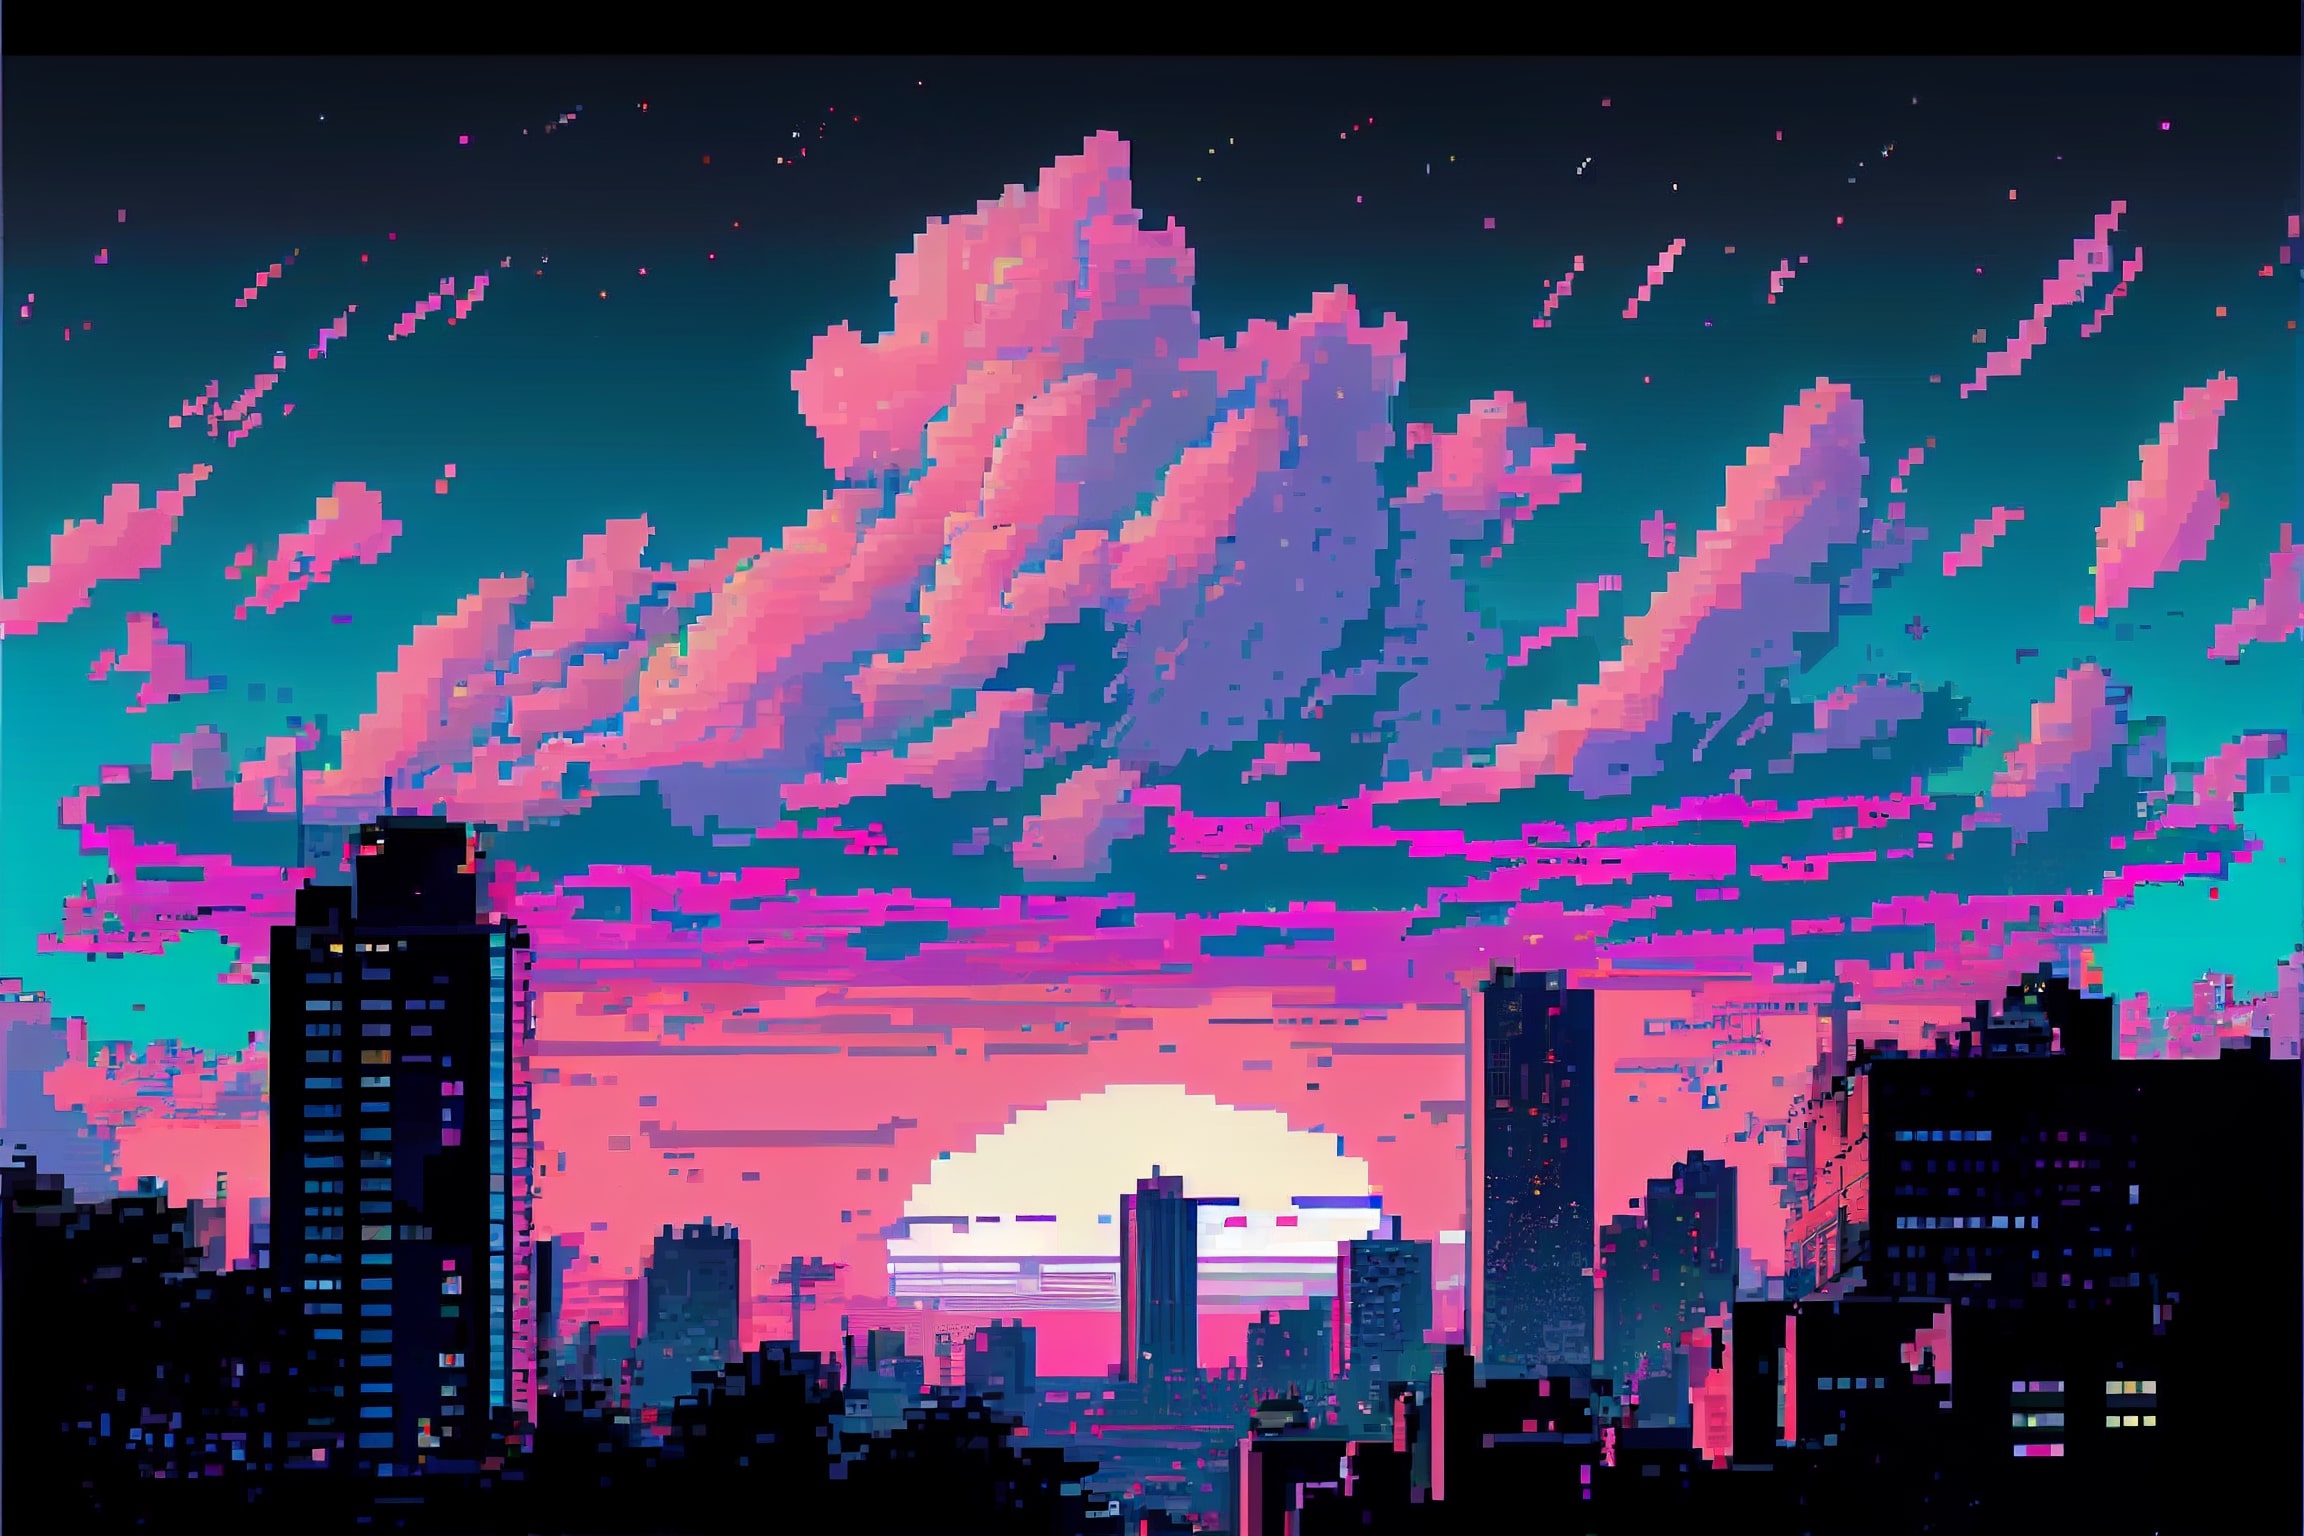 Pixel art picture of a city at sunset.